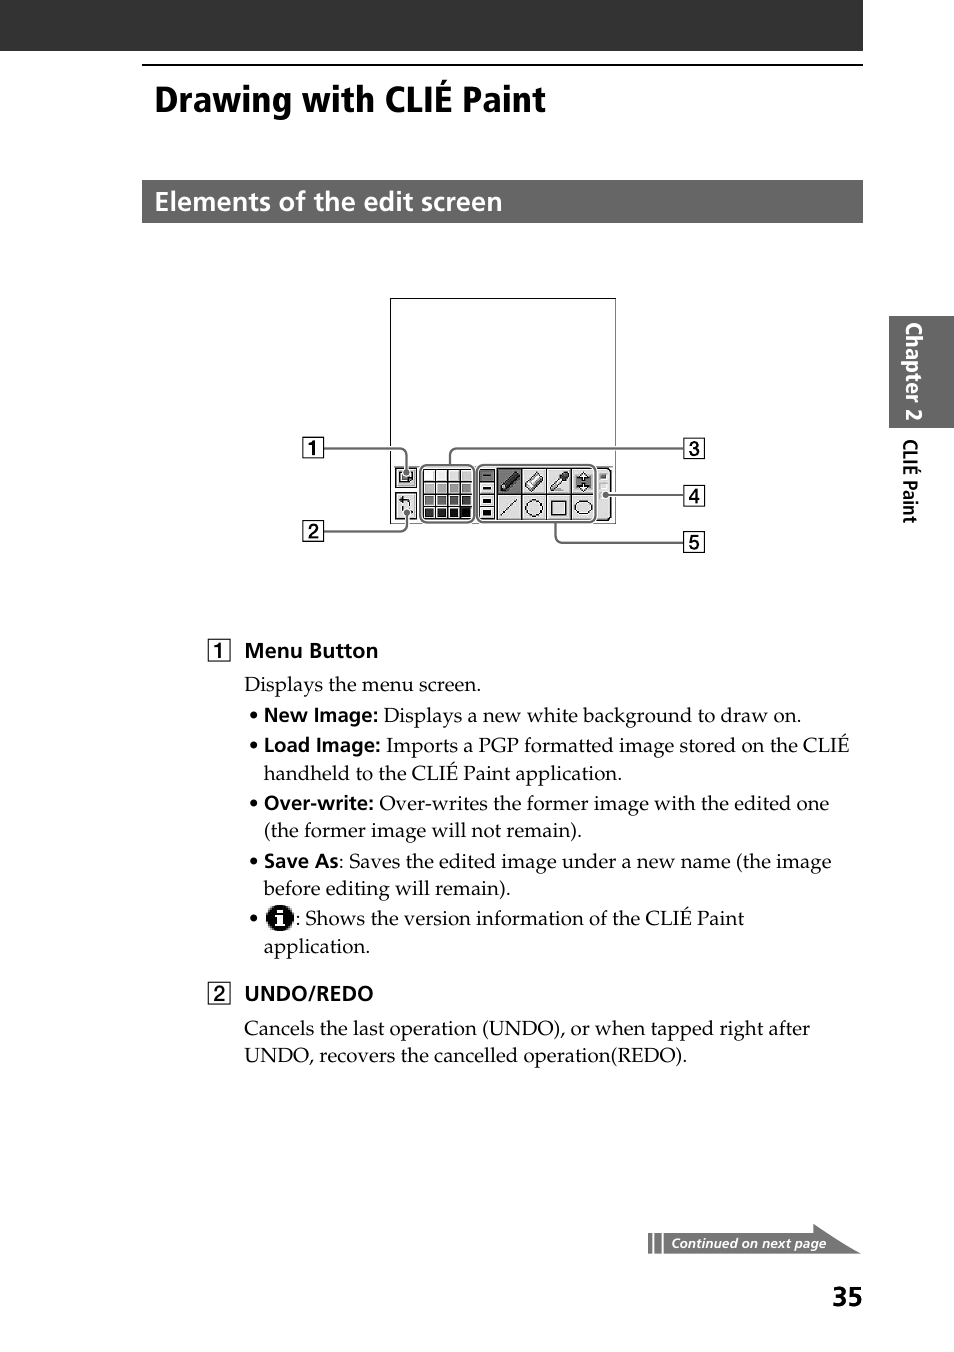 Drawing with clié paint, Elements of the edit screen | Sony PEG-T615C User Manual | Page 35 / 104